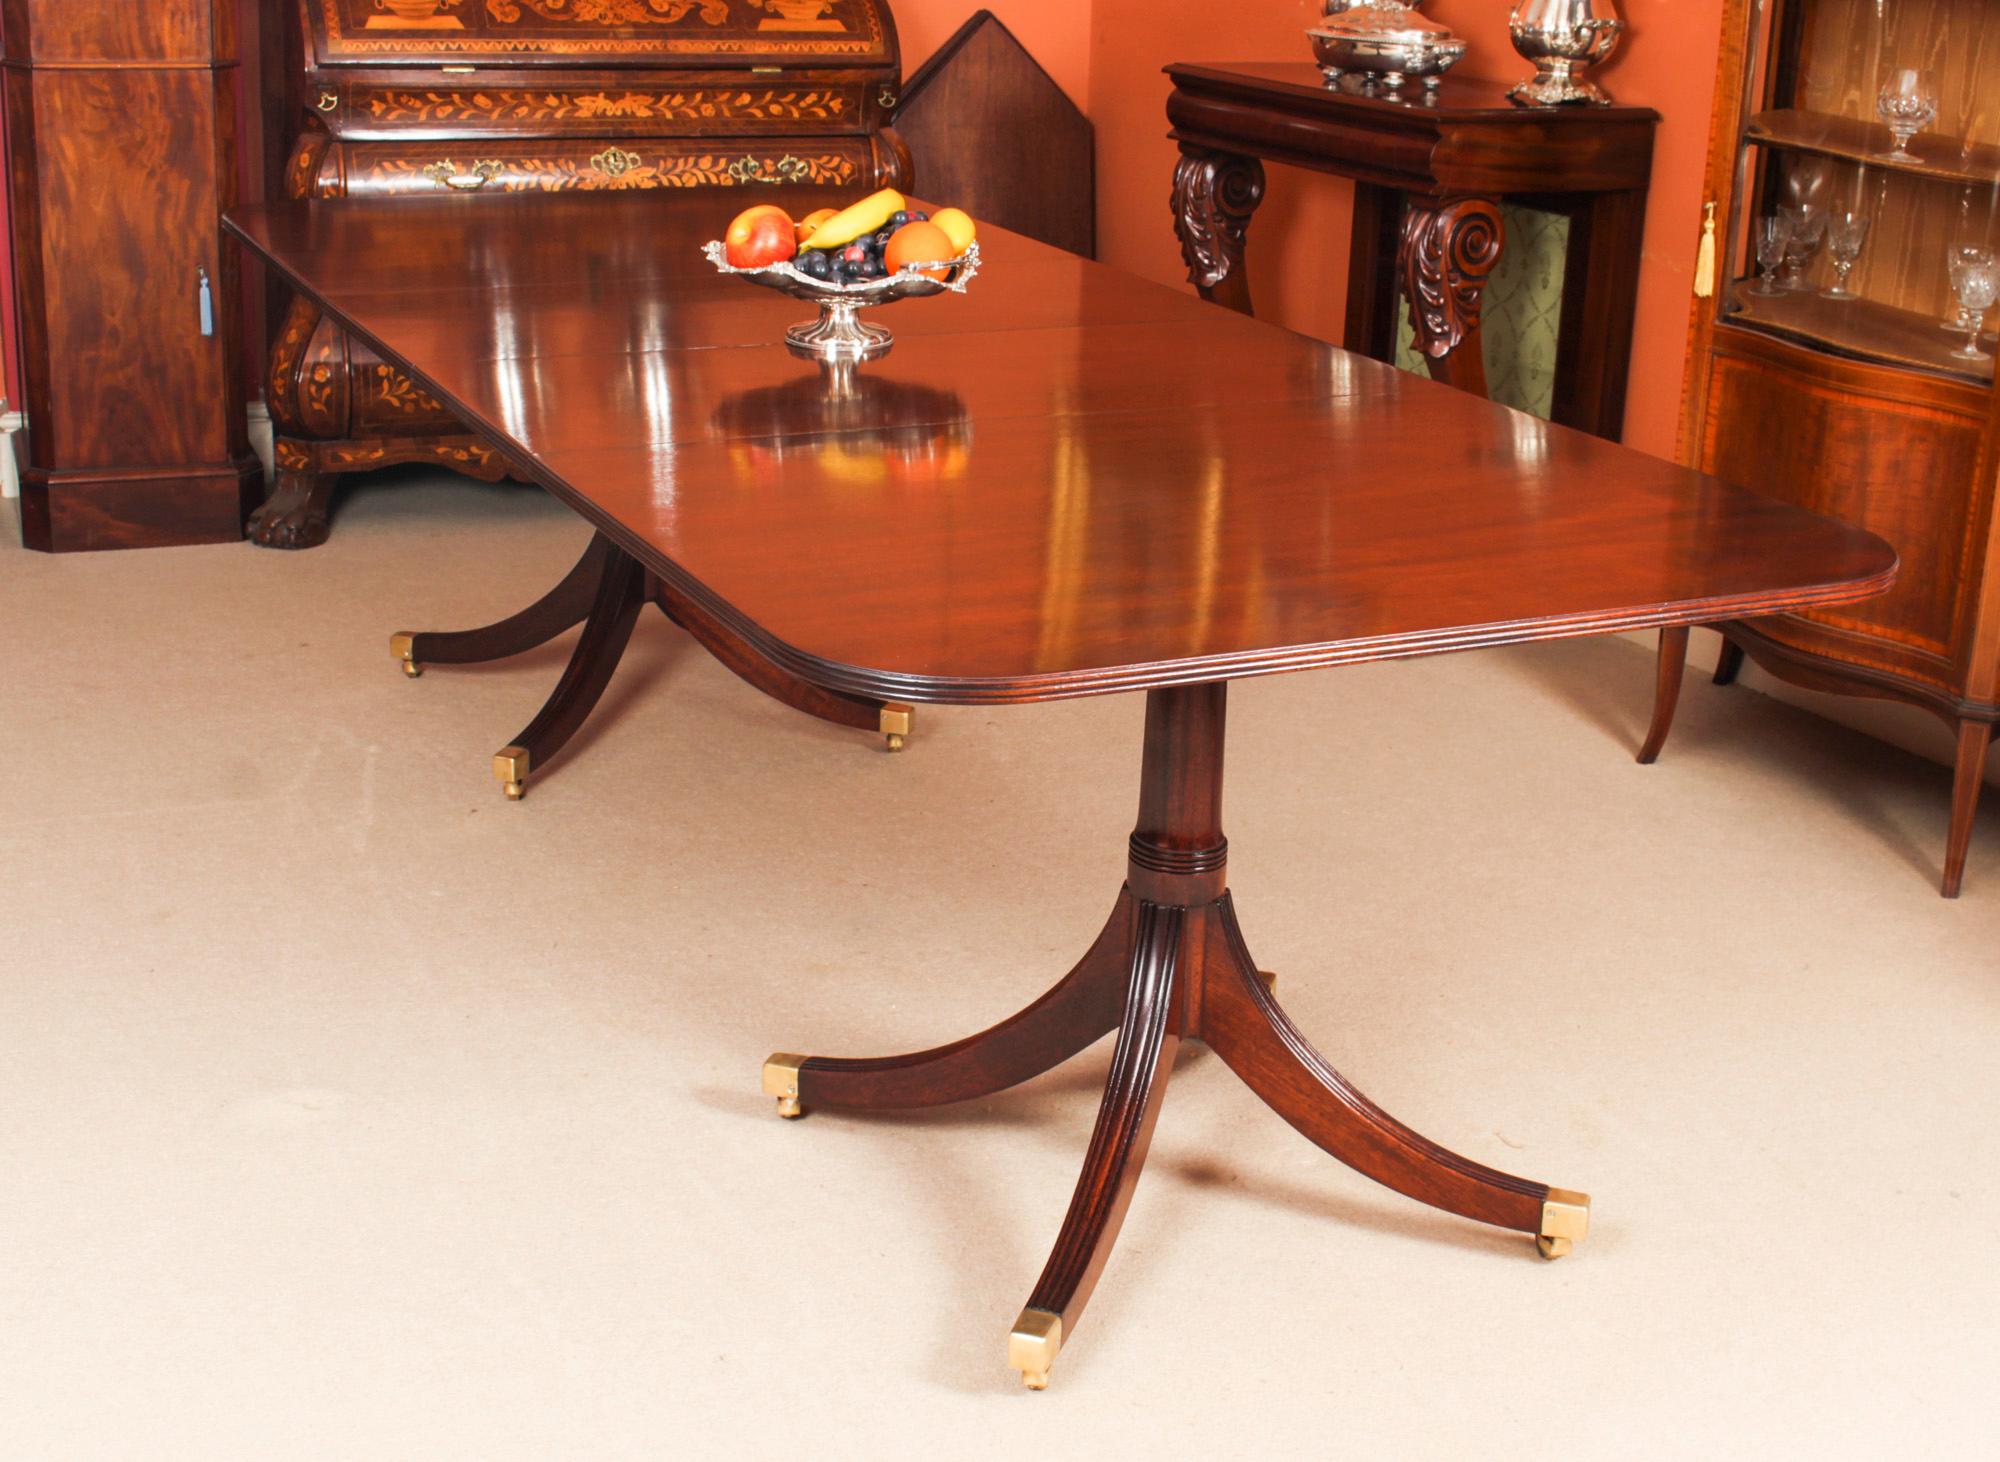 This is a fabulous Vintage Regency Revival dining table by the master cabinet maker William Tillman, Circa 1980 in date.

It is made of stunning solid mahogany and is raised on twin 